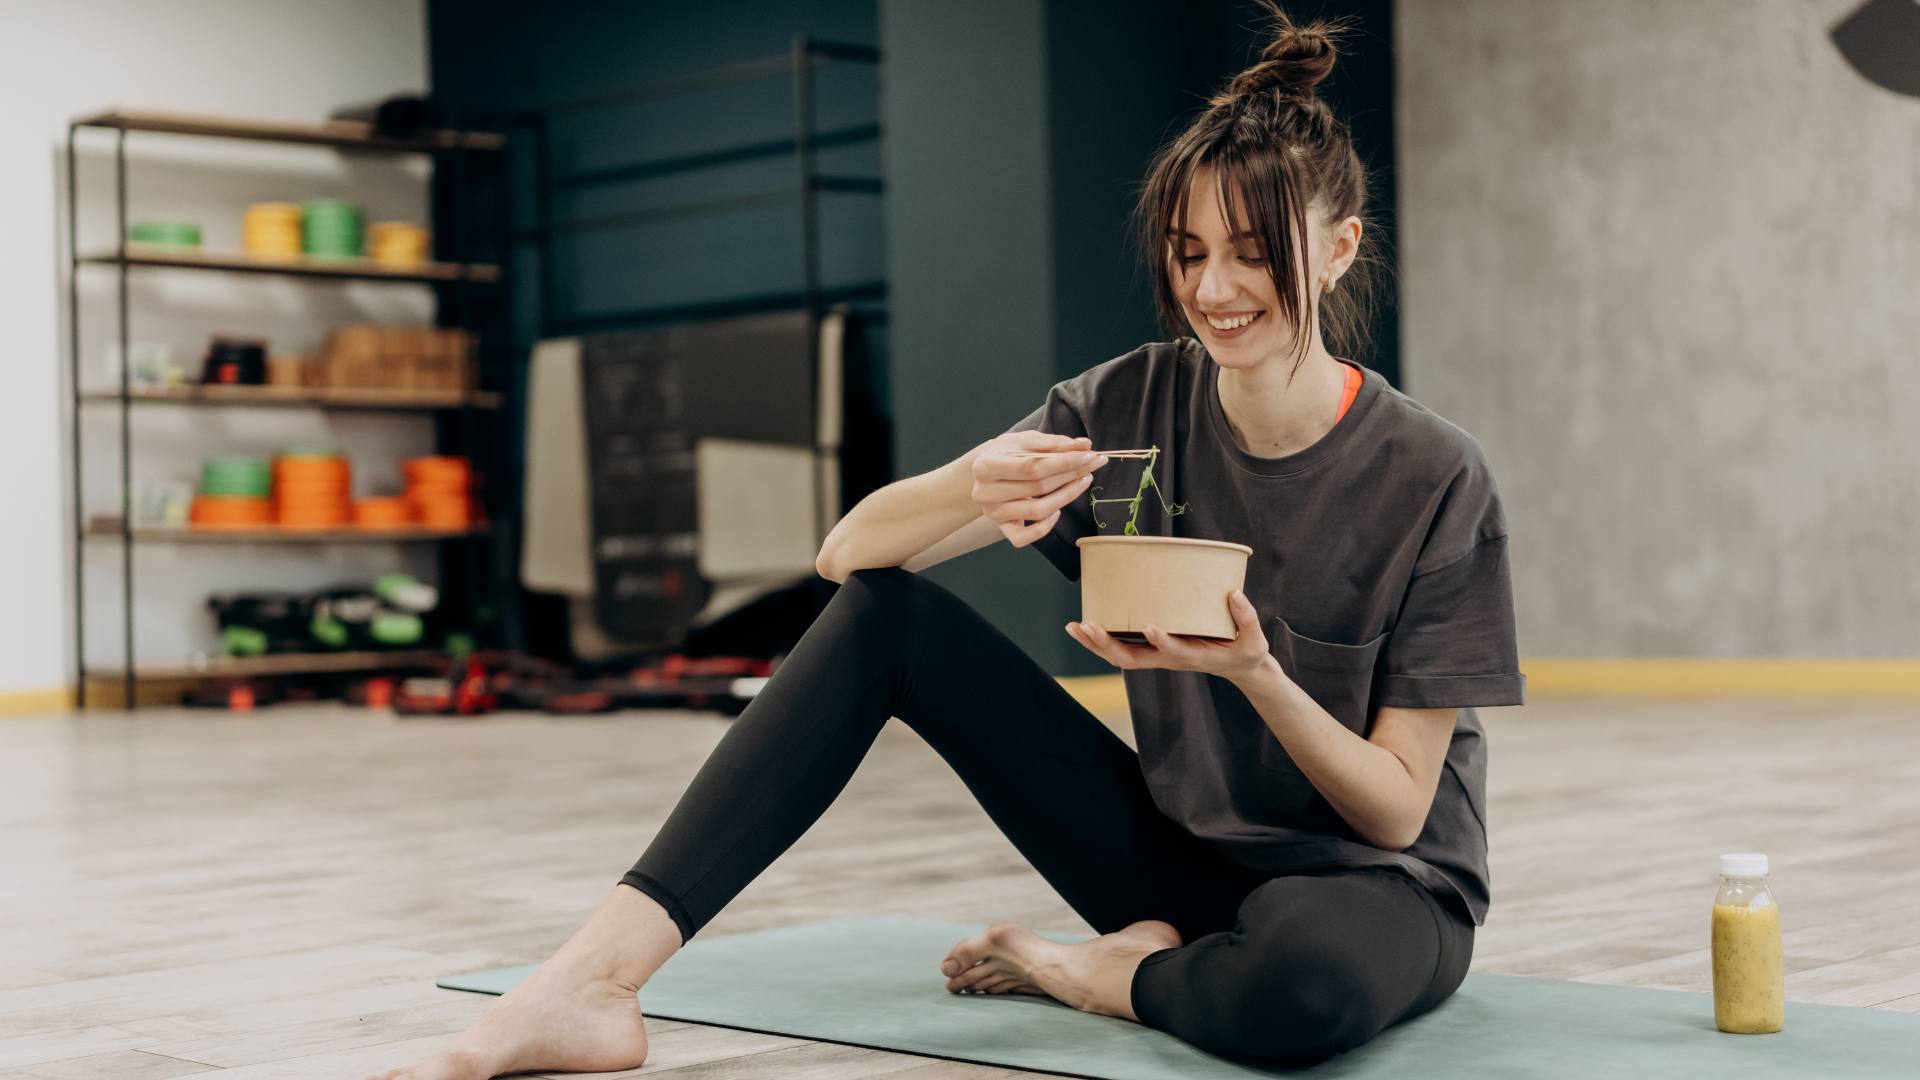 An image of a woman sitting on her yoga mat eating a healthy meal. She's healing her slow metabolism.